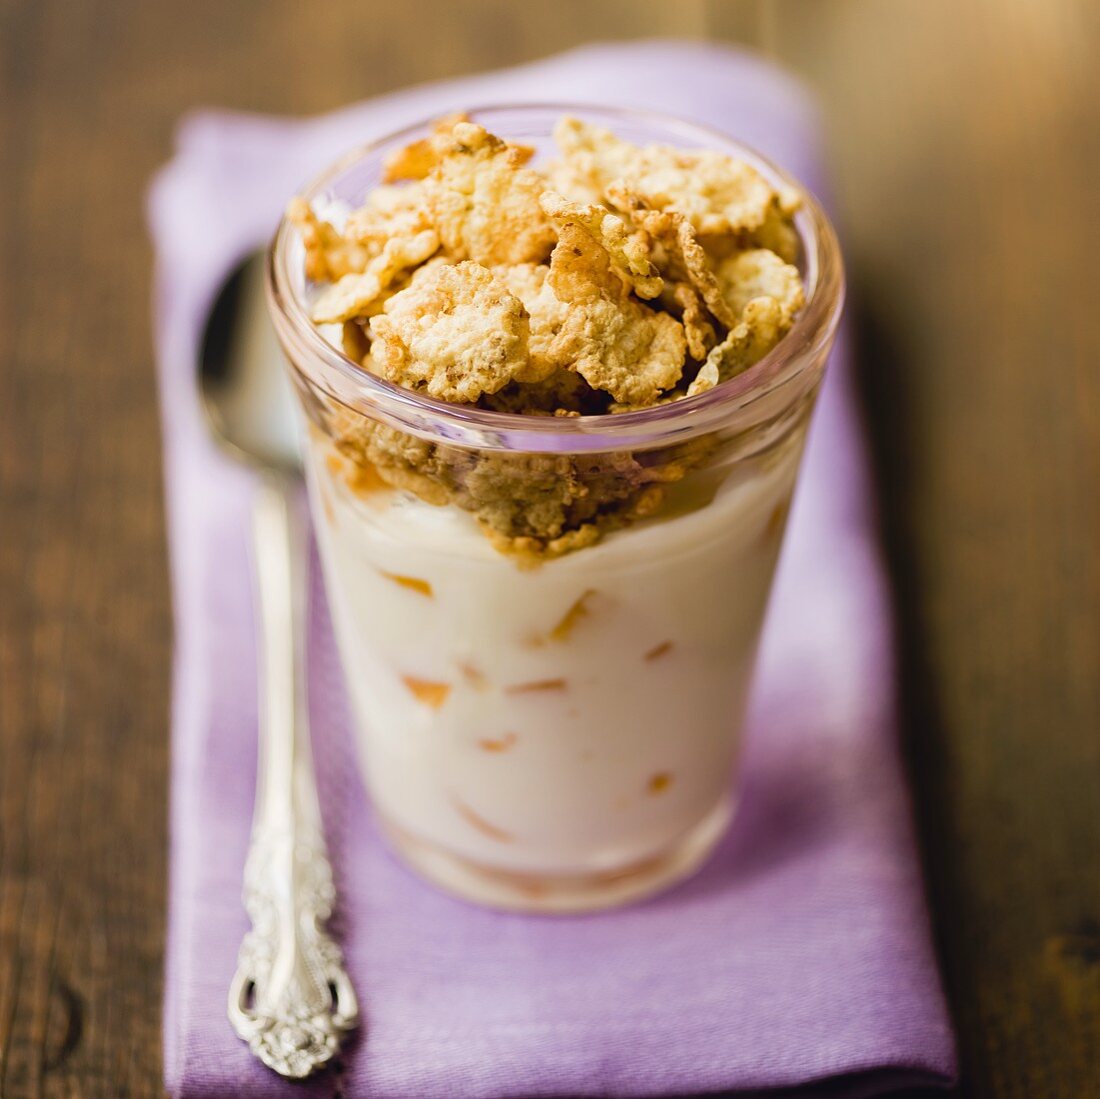 Yoghurt with peach and wholemeal cornflakes in a glass